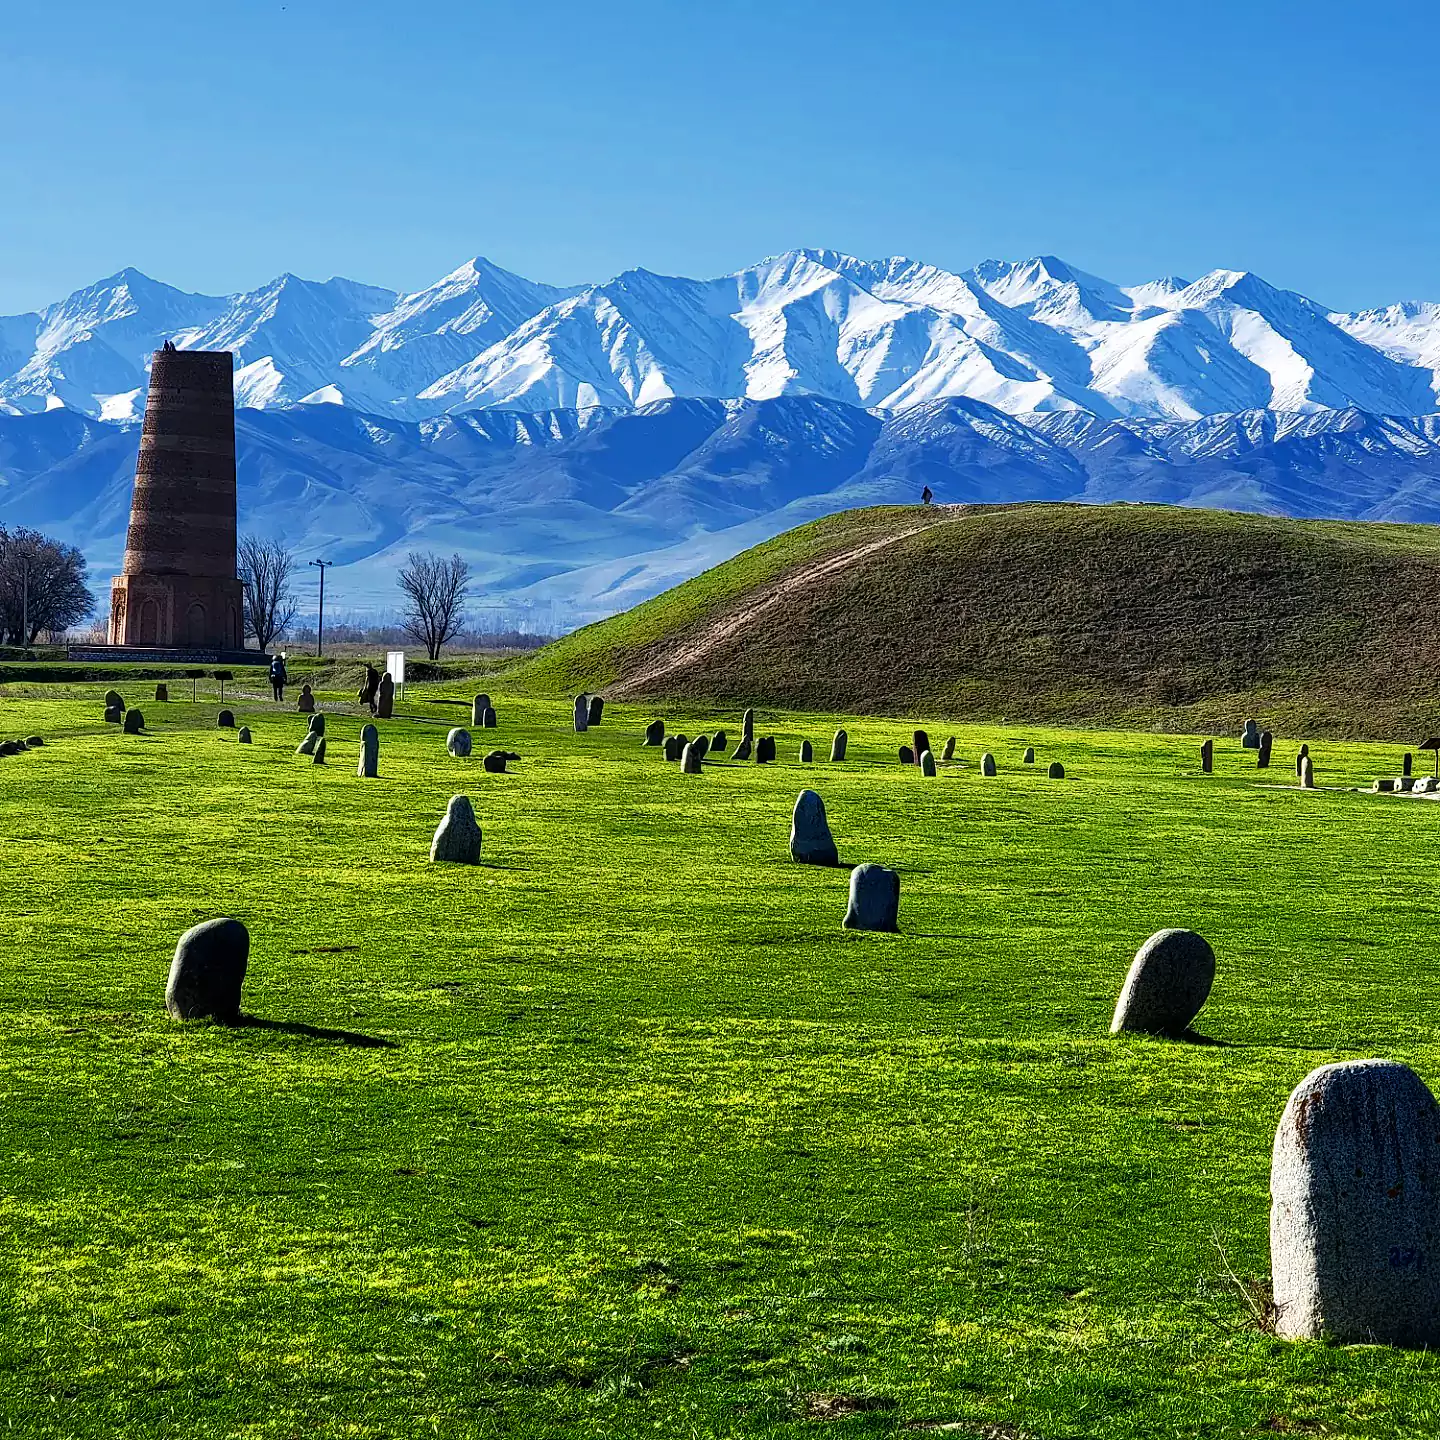 The Burana Tower framed by the snow capped mountains south of the capital of Bishkek.